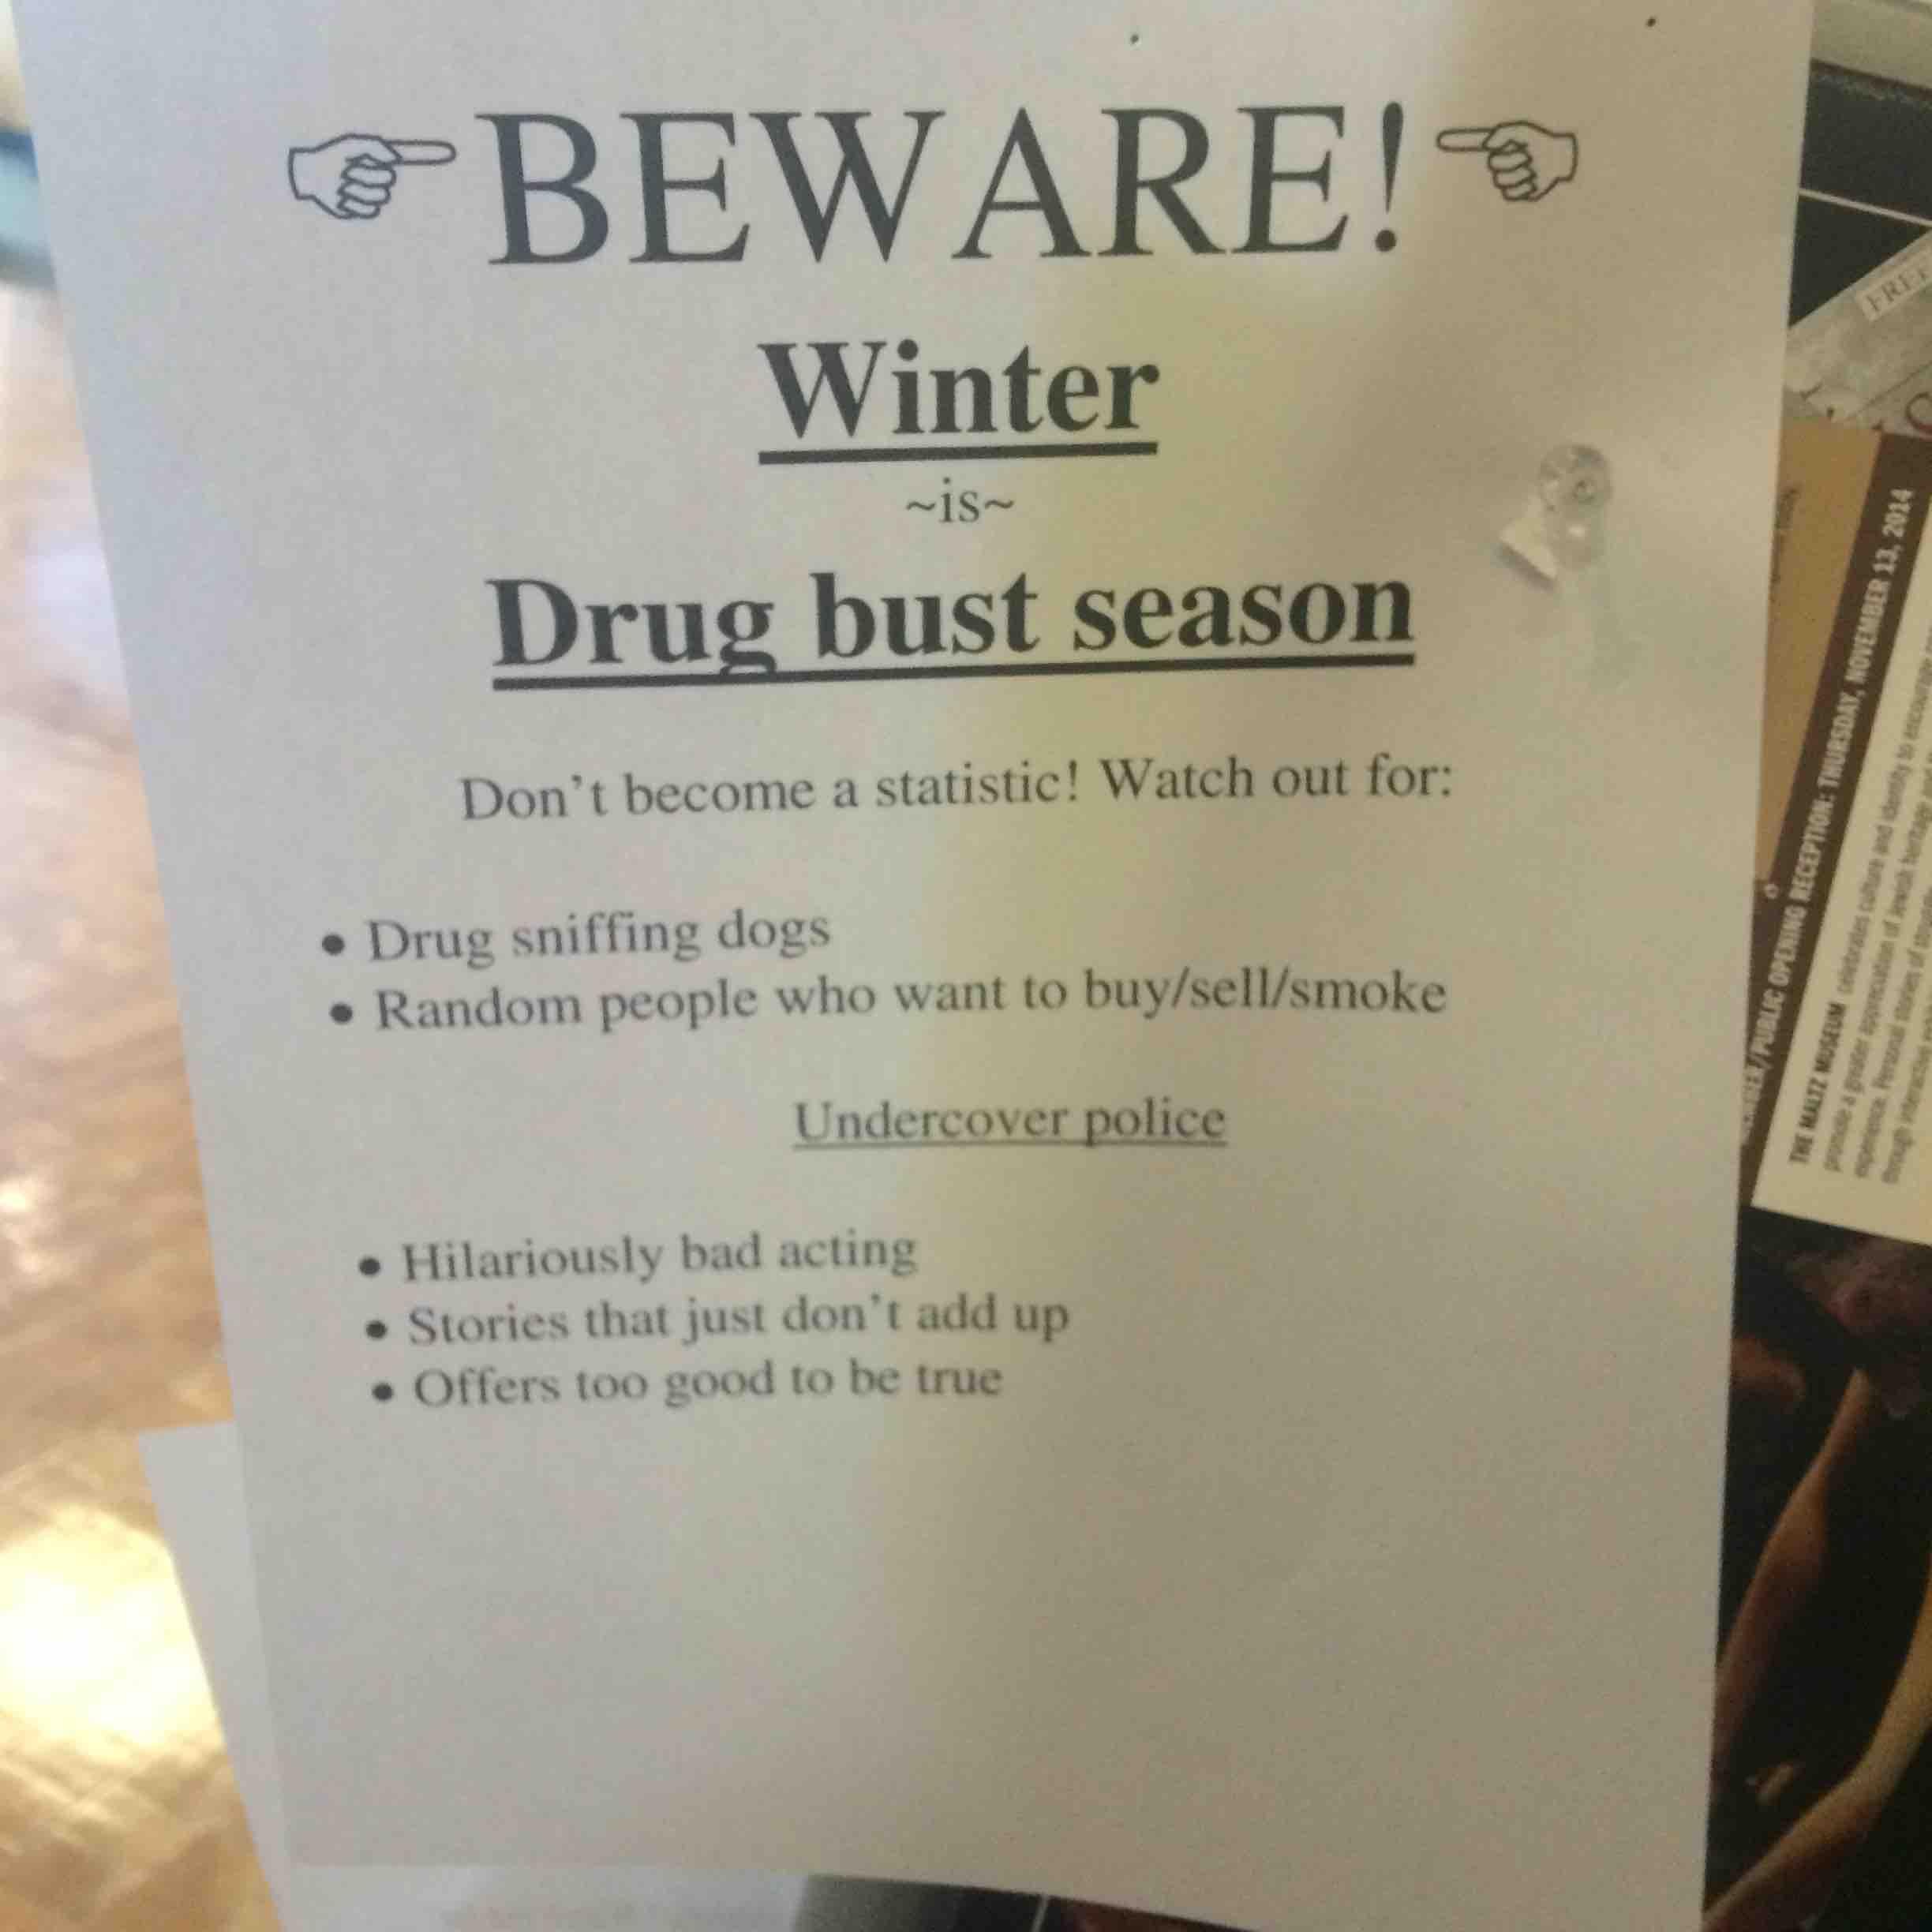 air freshener tree meme - Beware! Winter ~is~ Drug bust season Don't become a statistic! Watch out for D Sepublic Opening Reception. Thursday, R Drug sniffing dogs Random people who want to buysellsmoke Undercover police Mouson Ztw 1 Hilariously bad actin